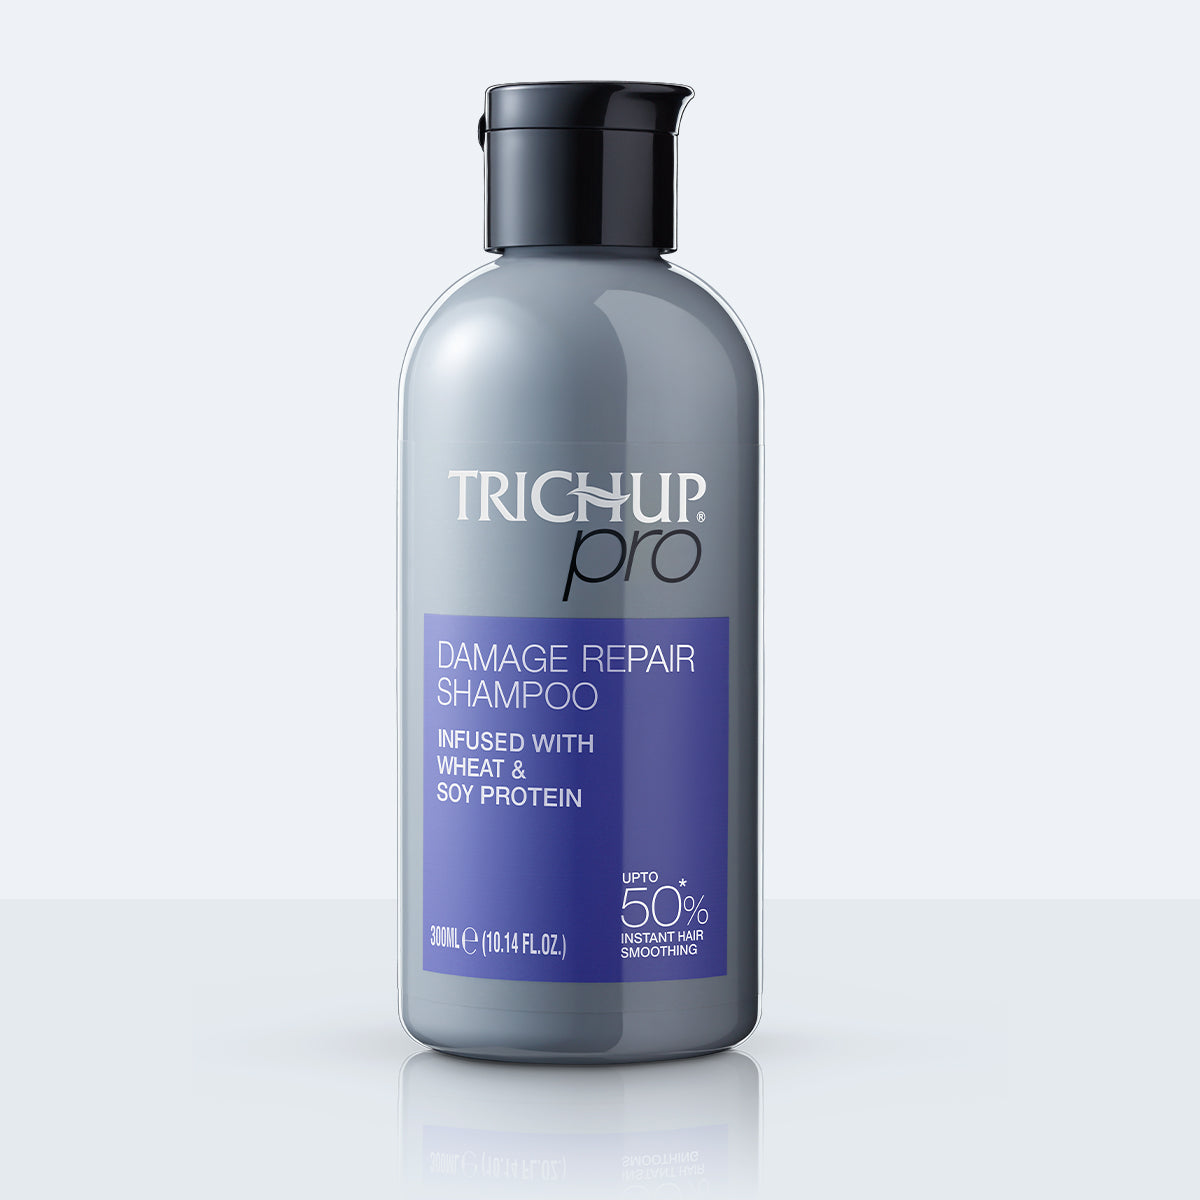 Trichup Pro Damage Repair Shampoo for Dry Frizzy Hair | Instant Dual Action Rebonding & Smoothing | Improves Texture, Volume, Manageability & Shine with Advanced Ingredients | For Men & Women - 300ml